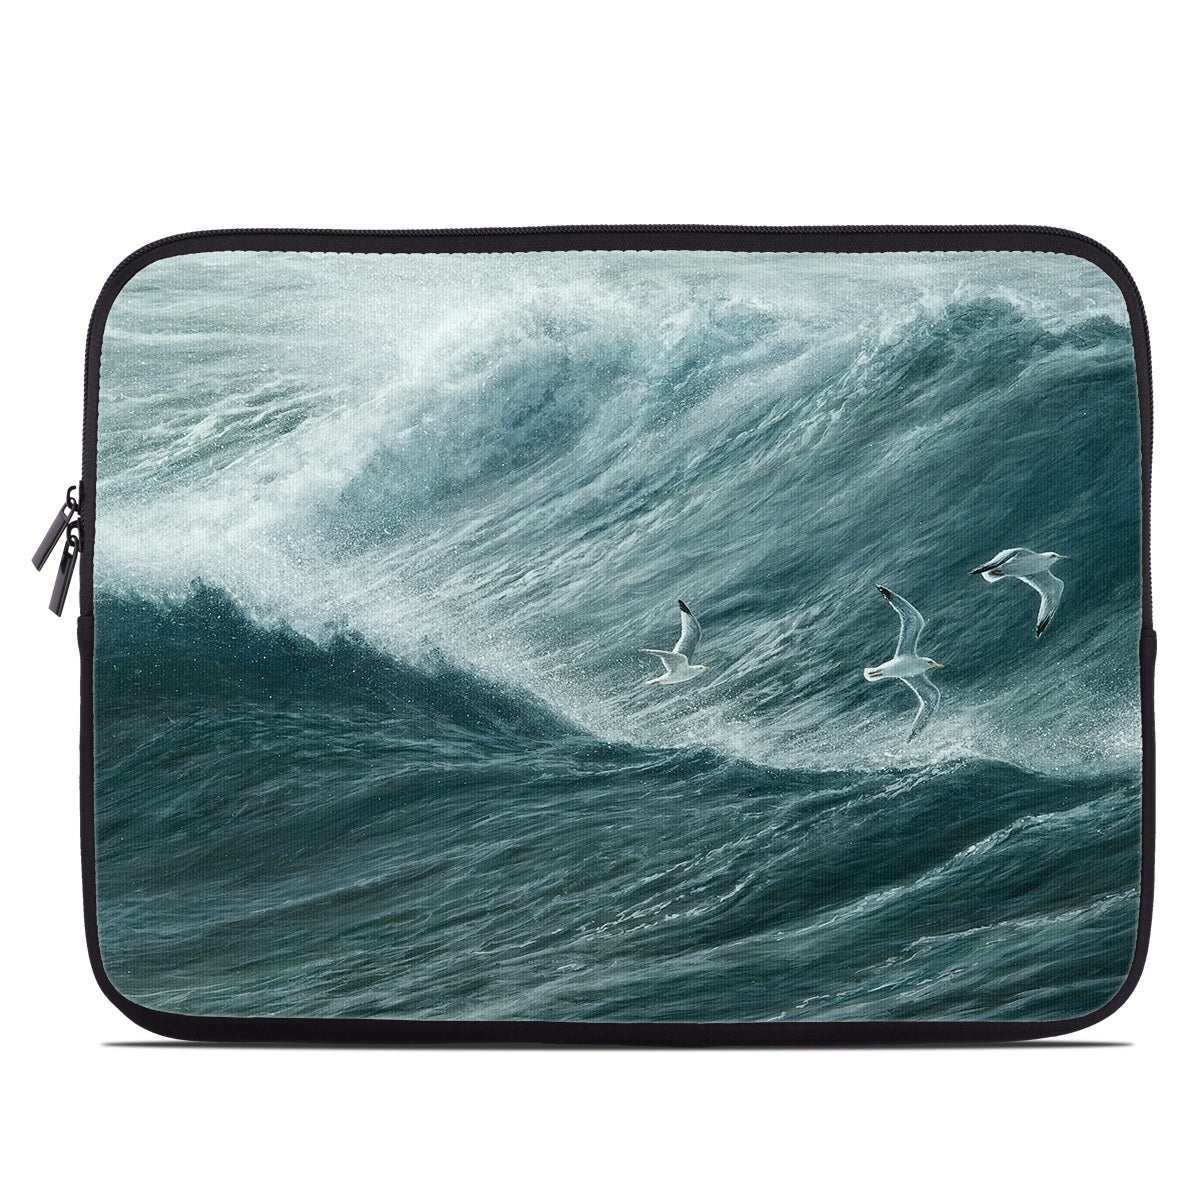 Riding the Wind - Laptop Sleeve